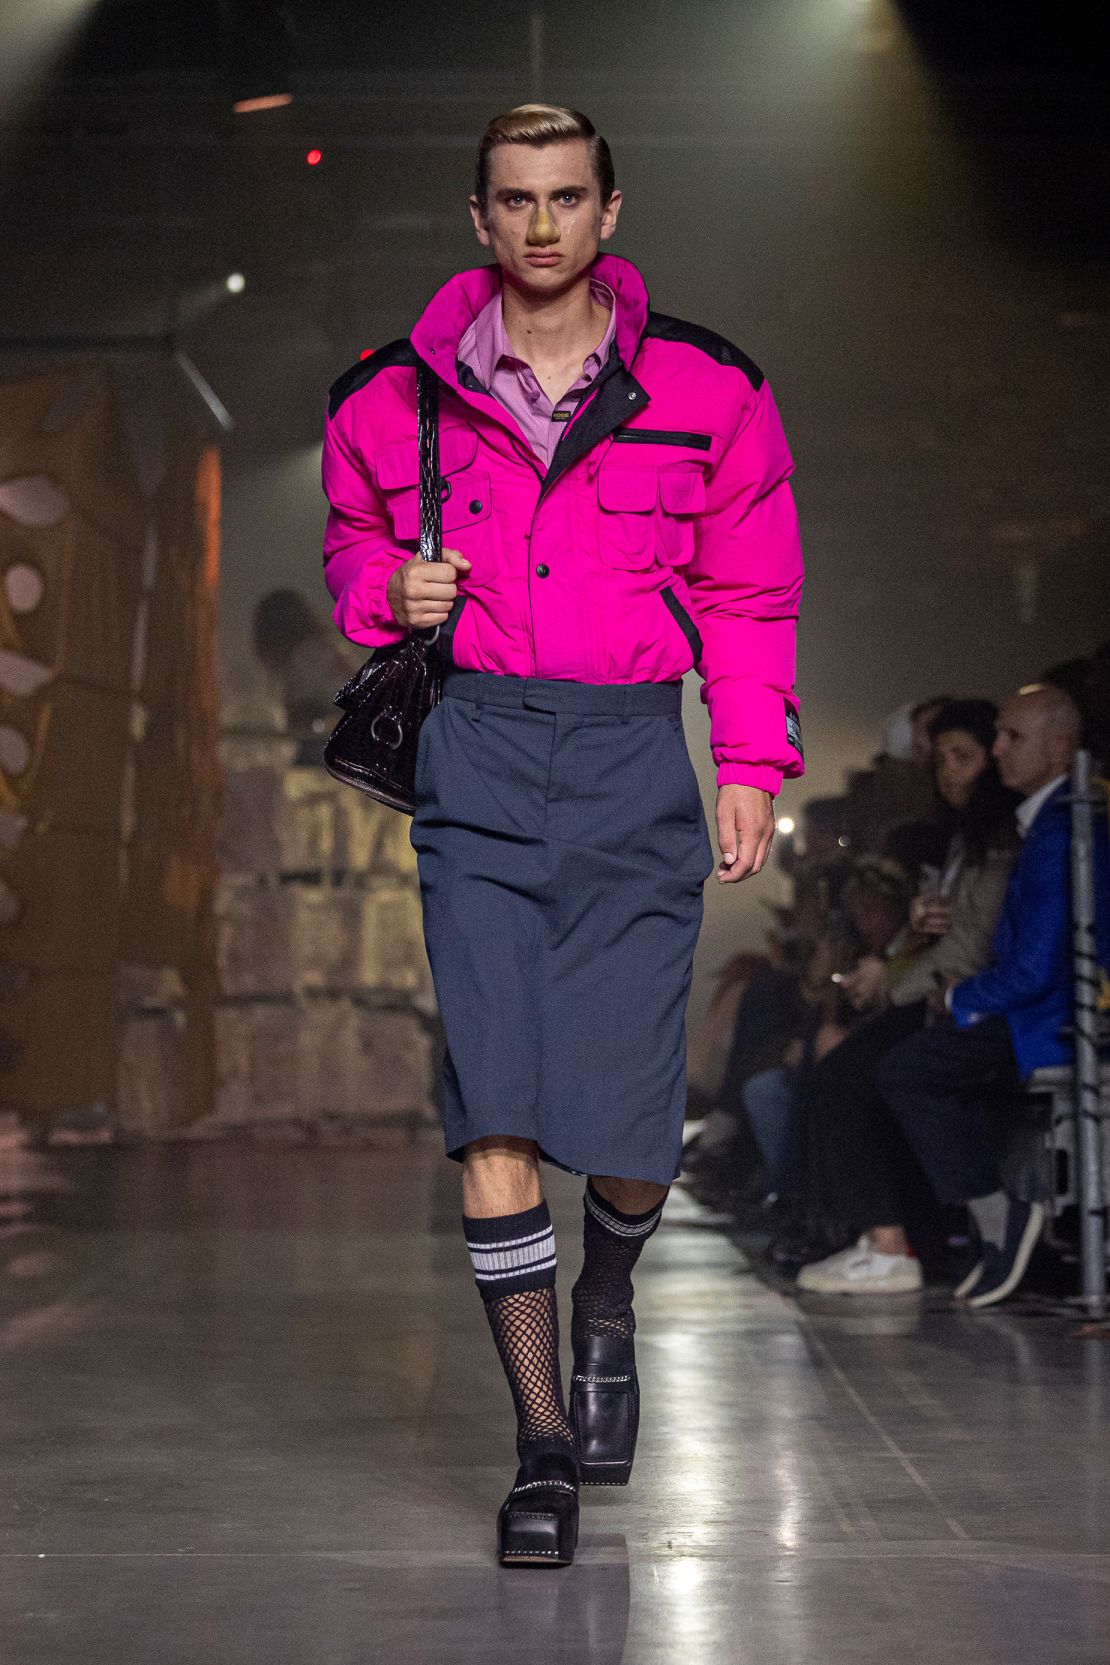 Her collection features hot-pink cagoules tucked into pencil skirts.